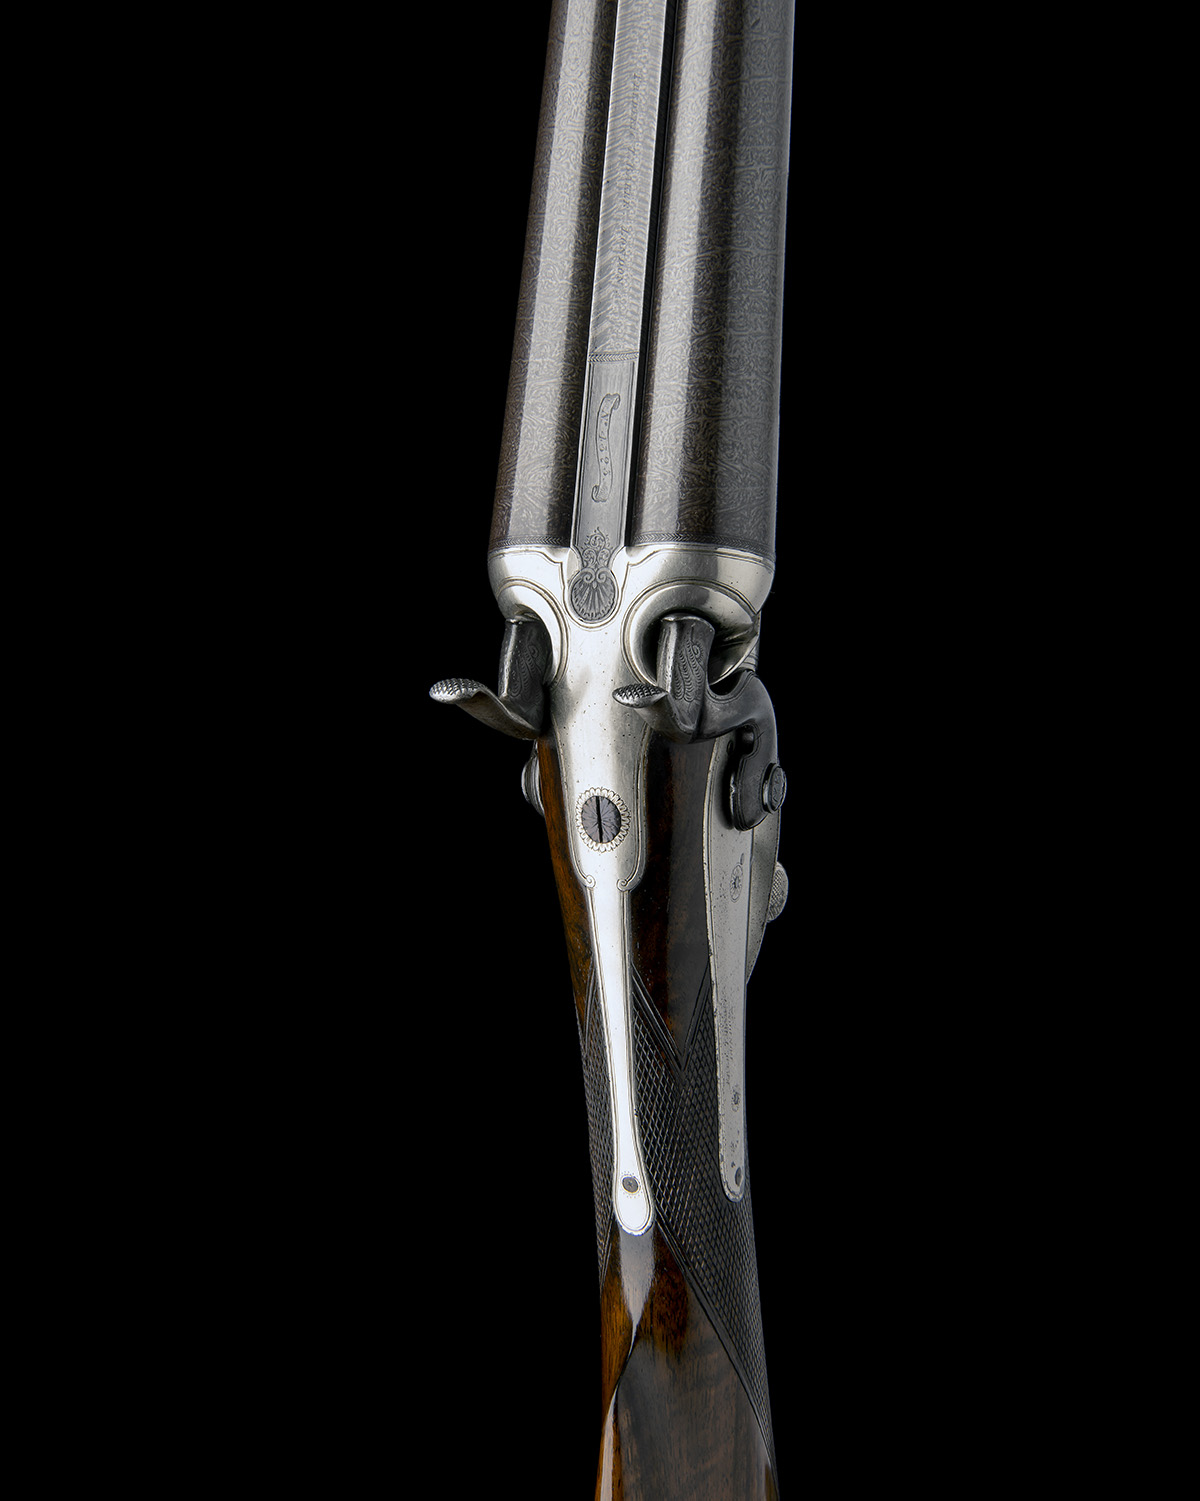 FREDERIC T. BAKER, AN 8-BORE DOUBLE-BARRELLED ROTARY-UNDERLEVER HAMMERGUN, serial no. 4323, circa - Image 4 of 9